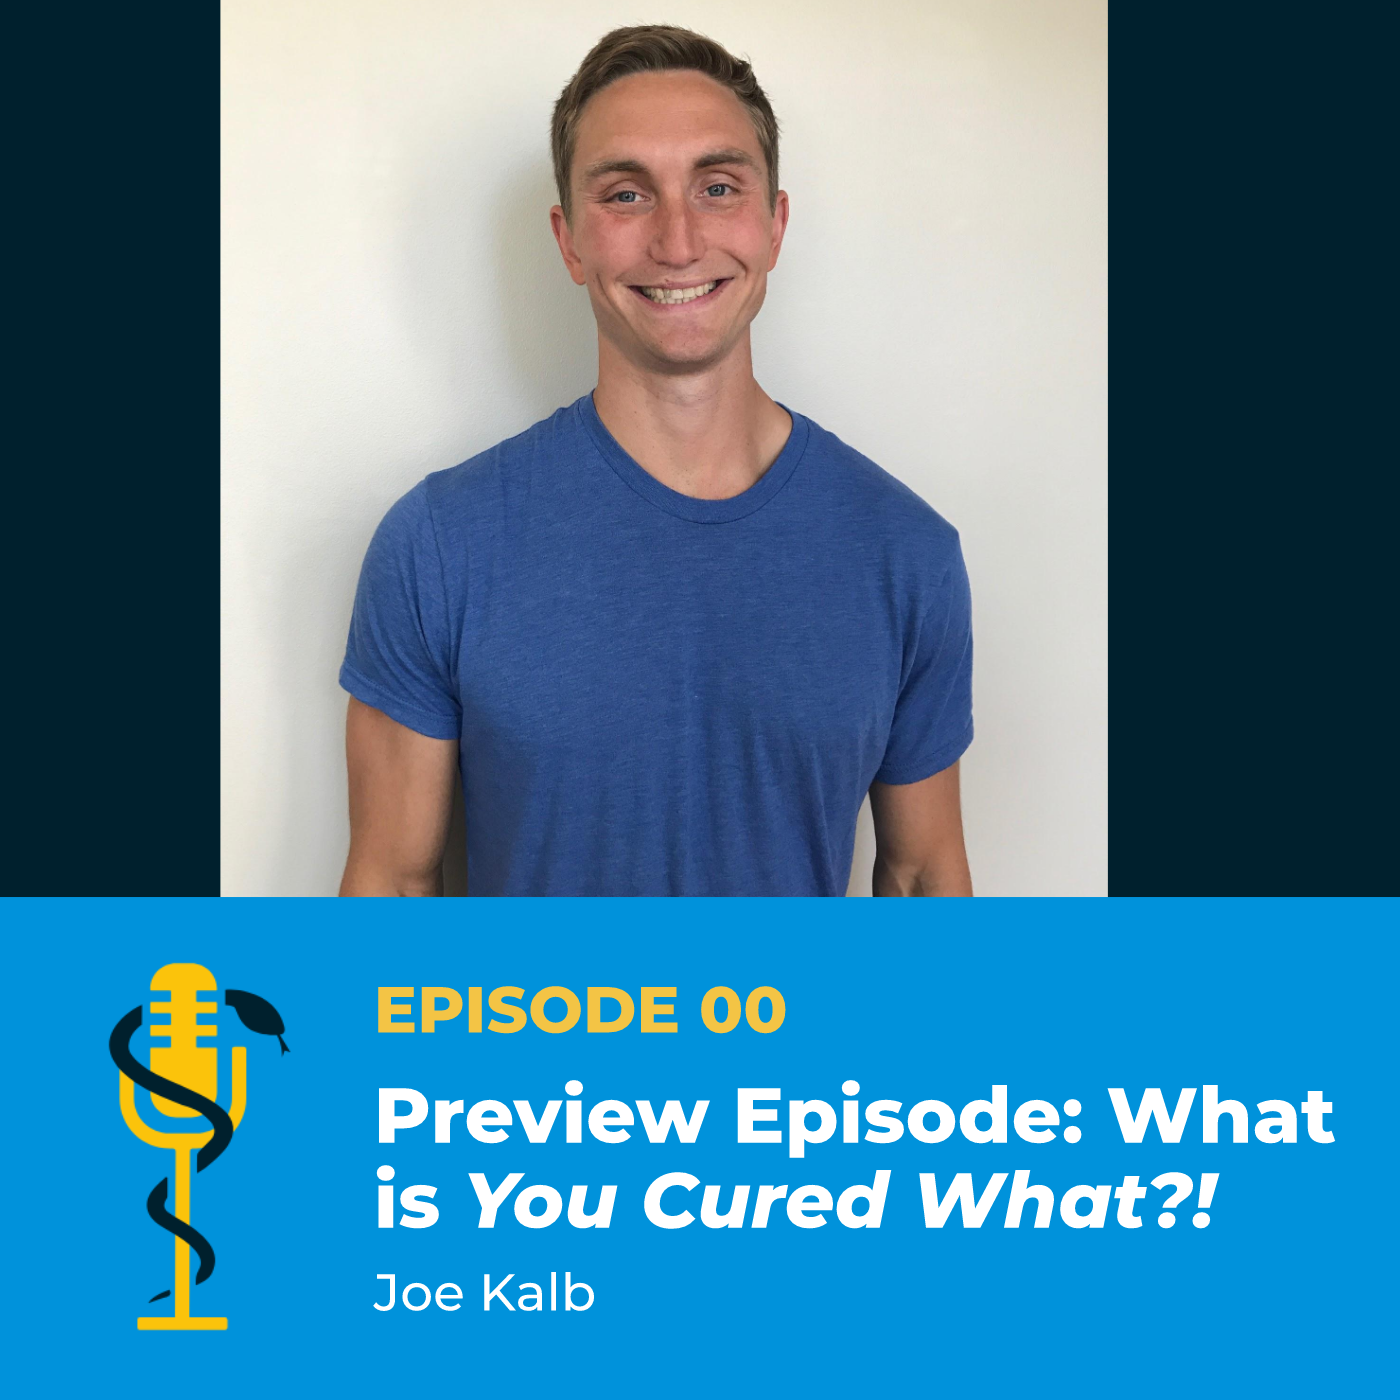 Ep.00: Preview Episode: What is You Cured What?!